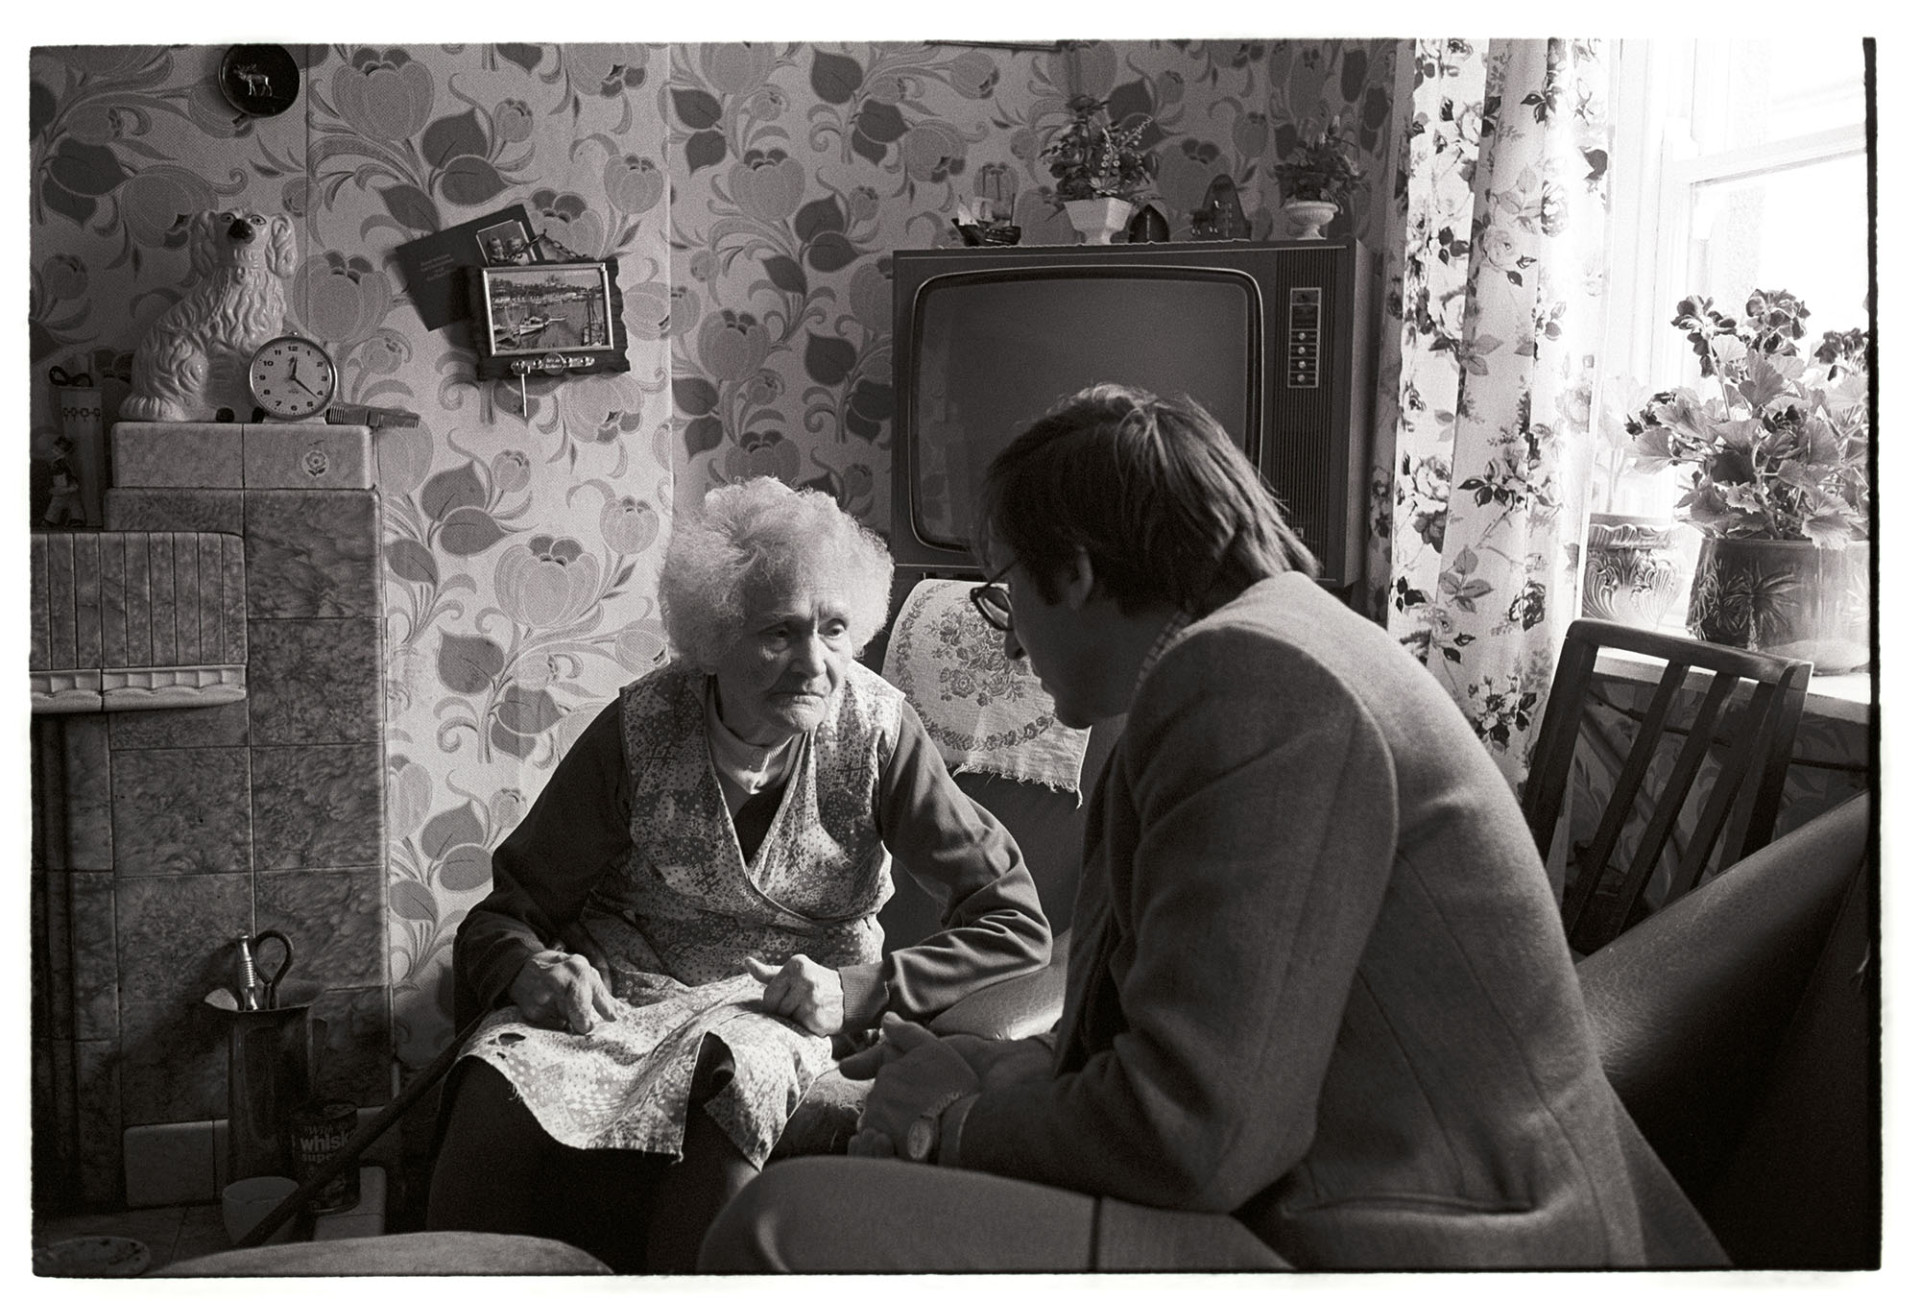 Doctor talking to elderly woman at home. 
[Dr Paul Bangay talking to a woman in her living room at her home in Torrington. A television, fireplace, ornaments on the mantelpiece and patterned wallpaper can be seen in the background.]